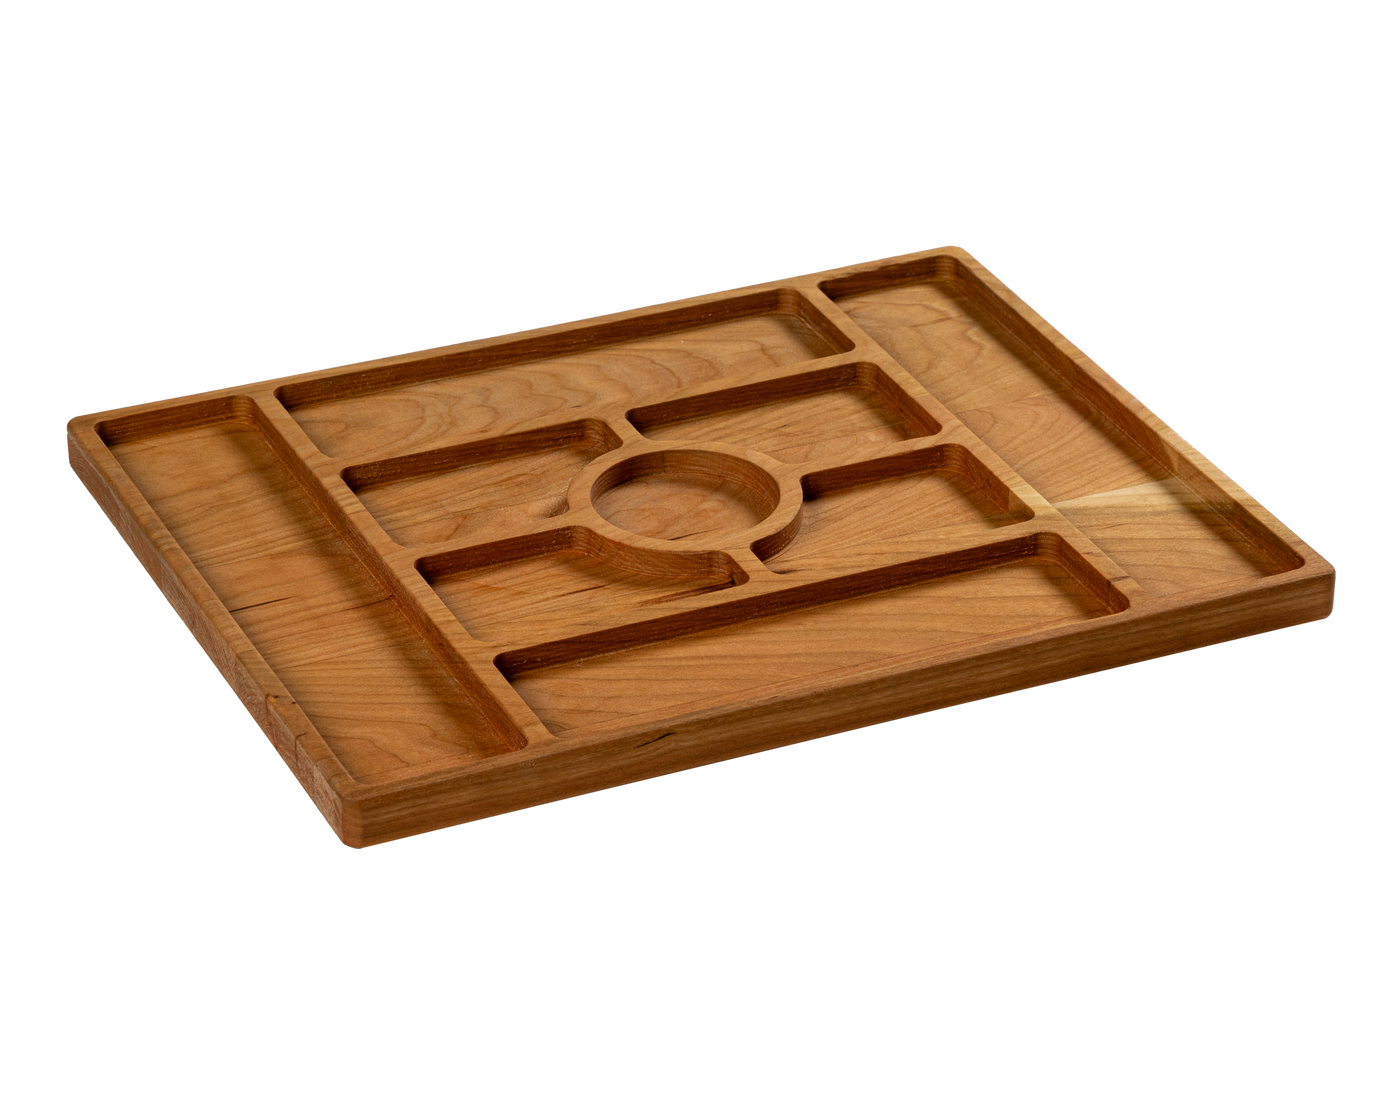 Cherry - CHA14 - Charcuterie Board with Compartments 14"x11"x3/4"